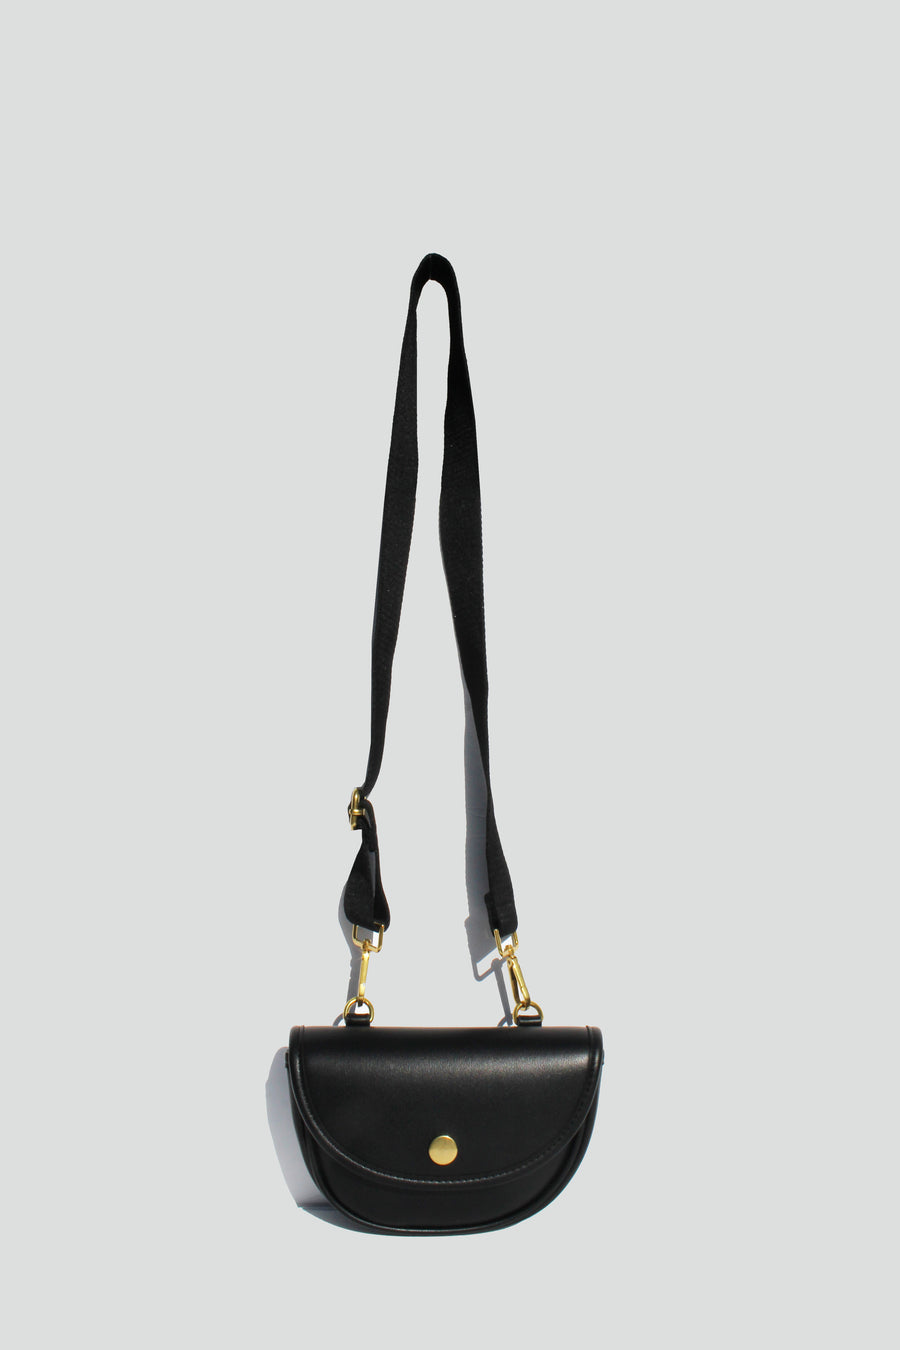 Featuring a small multi compartment crossbody bag with an adjustable strap in the color black